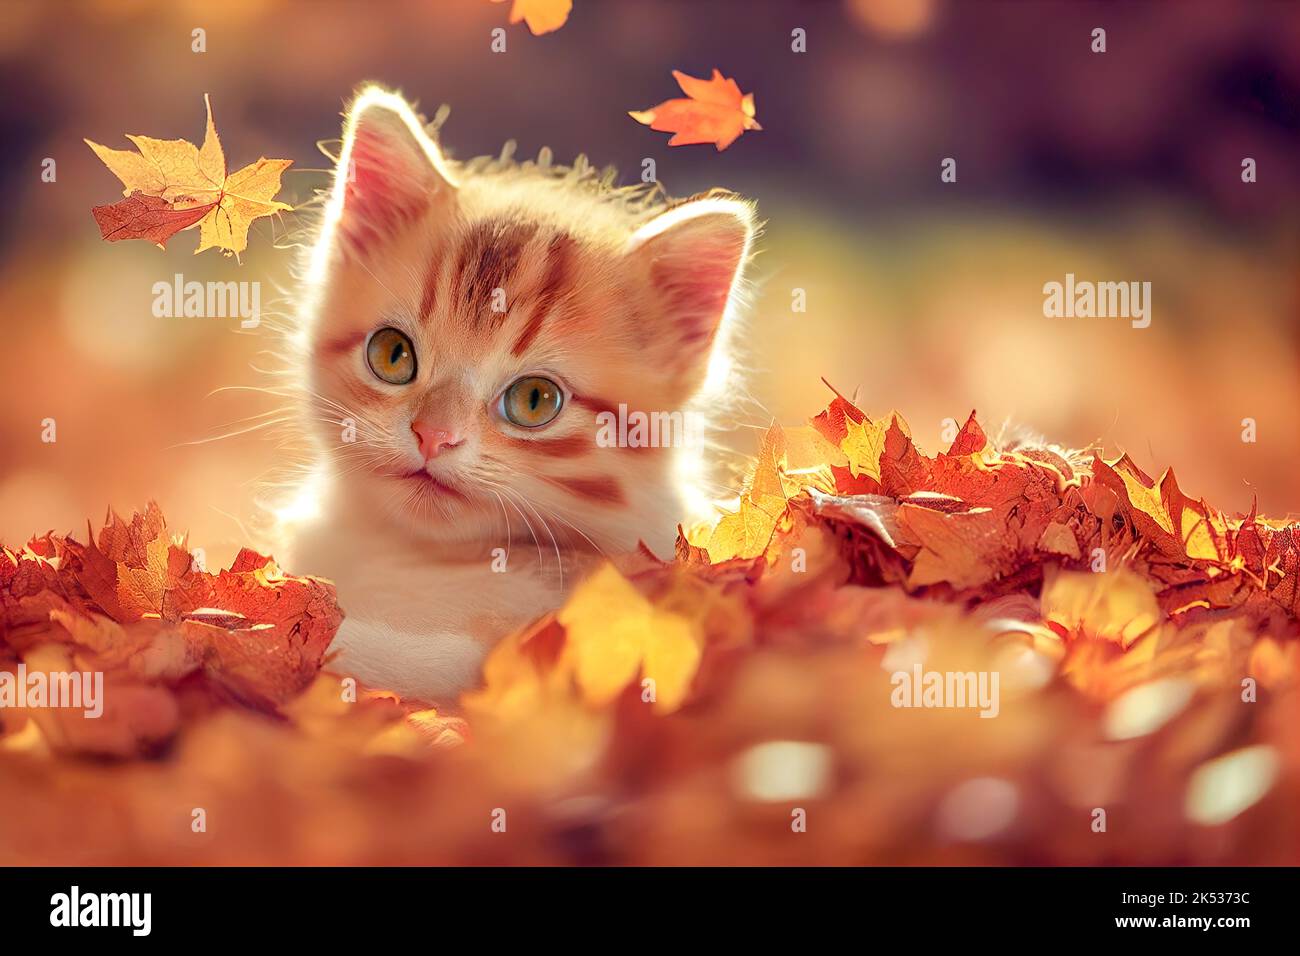 Photo of a fluffy yellow cute kitty in the autumn garden with falling leaves Stock Photo